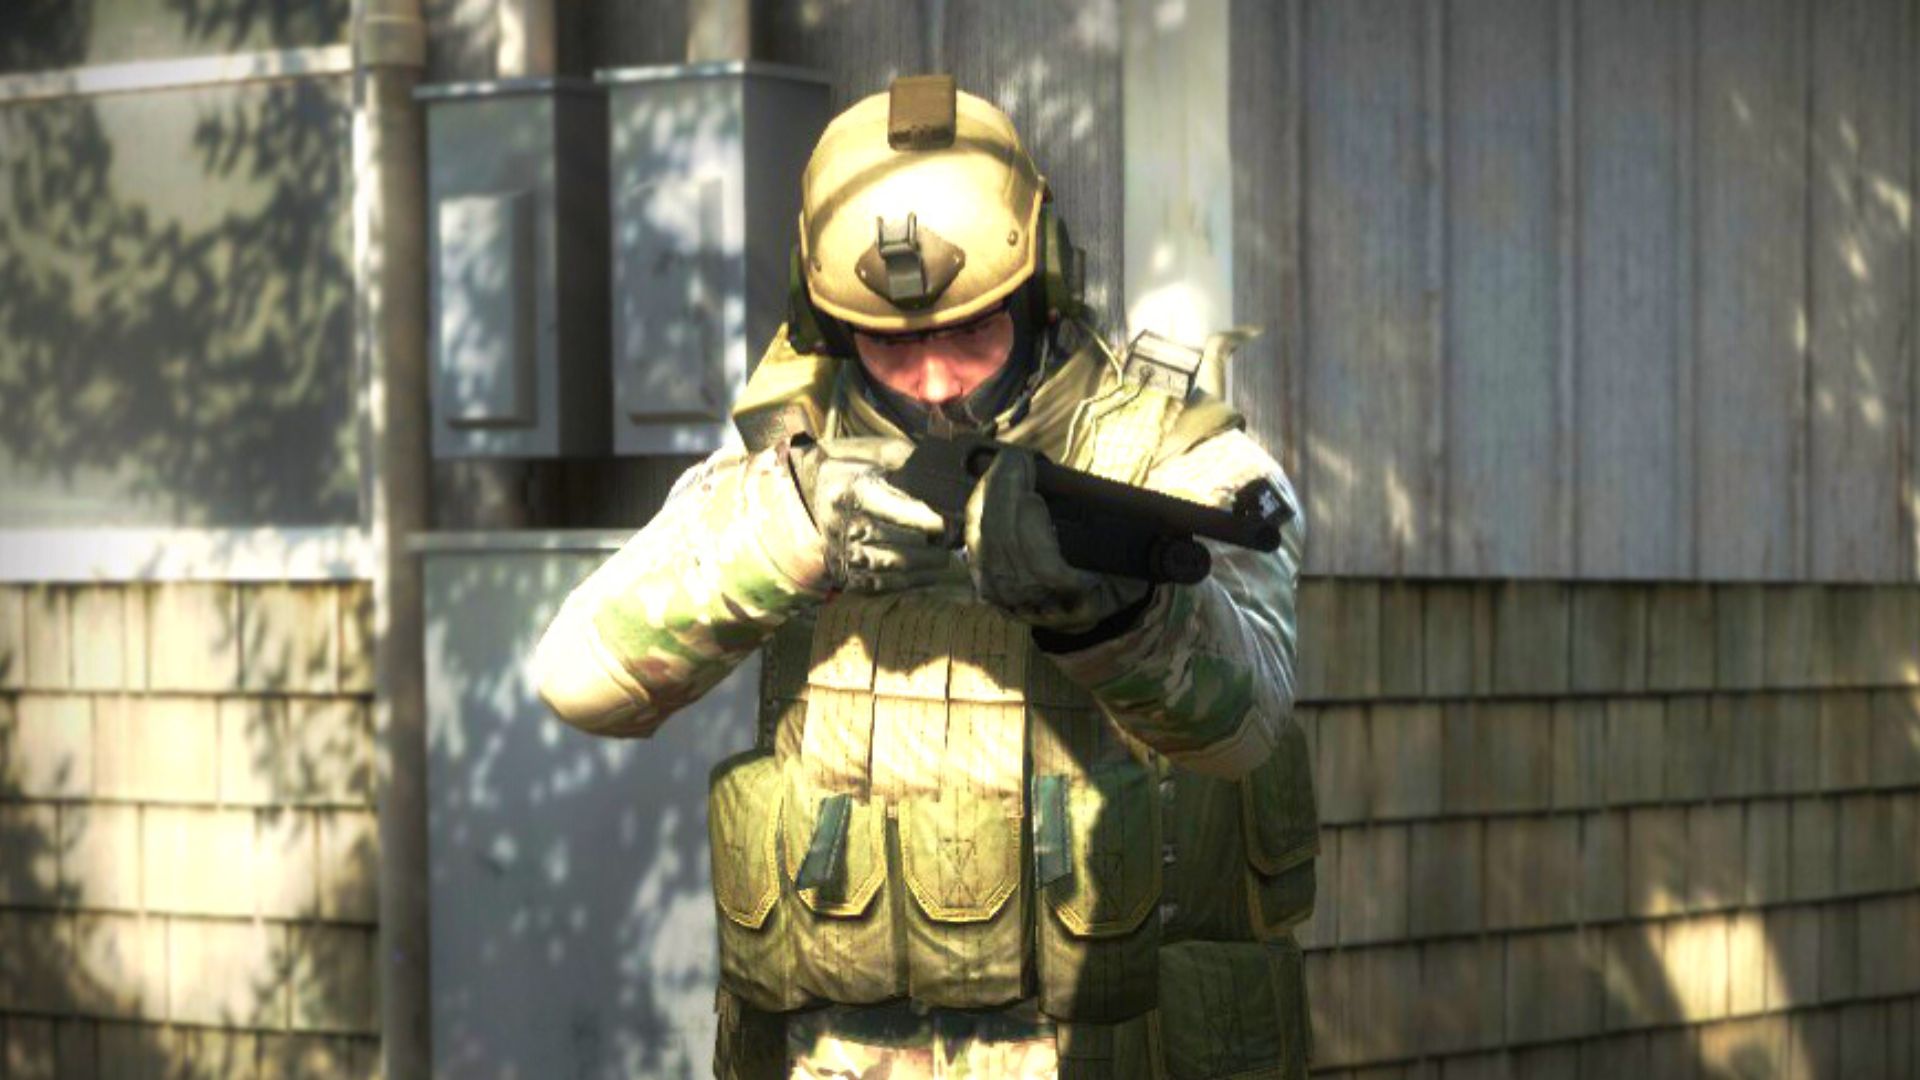 CS:GO Breaks Player Count Record Once Again Amid Sequel Rumors